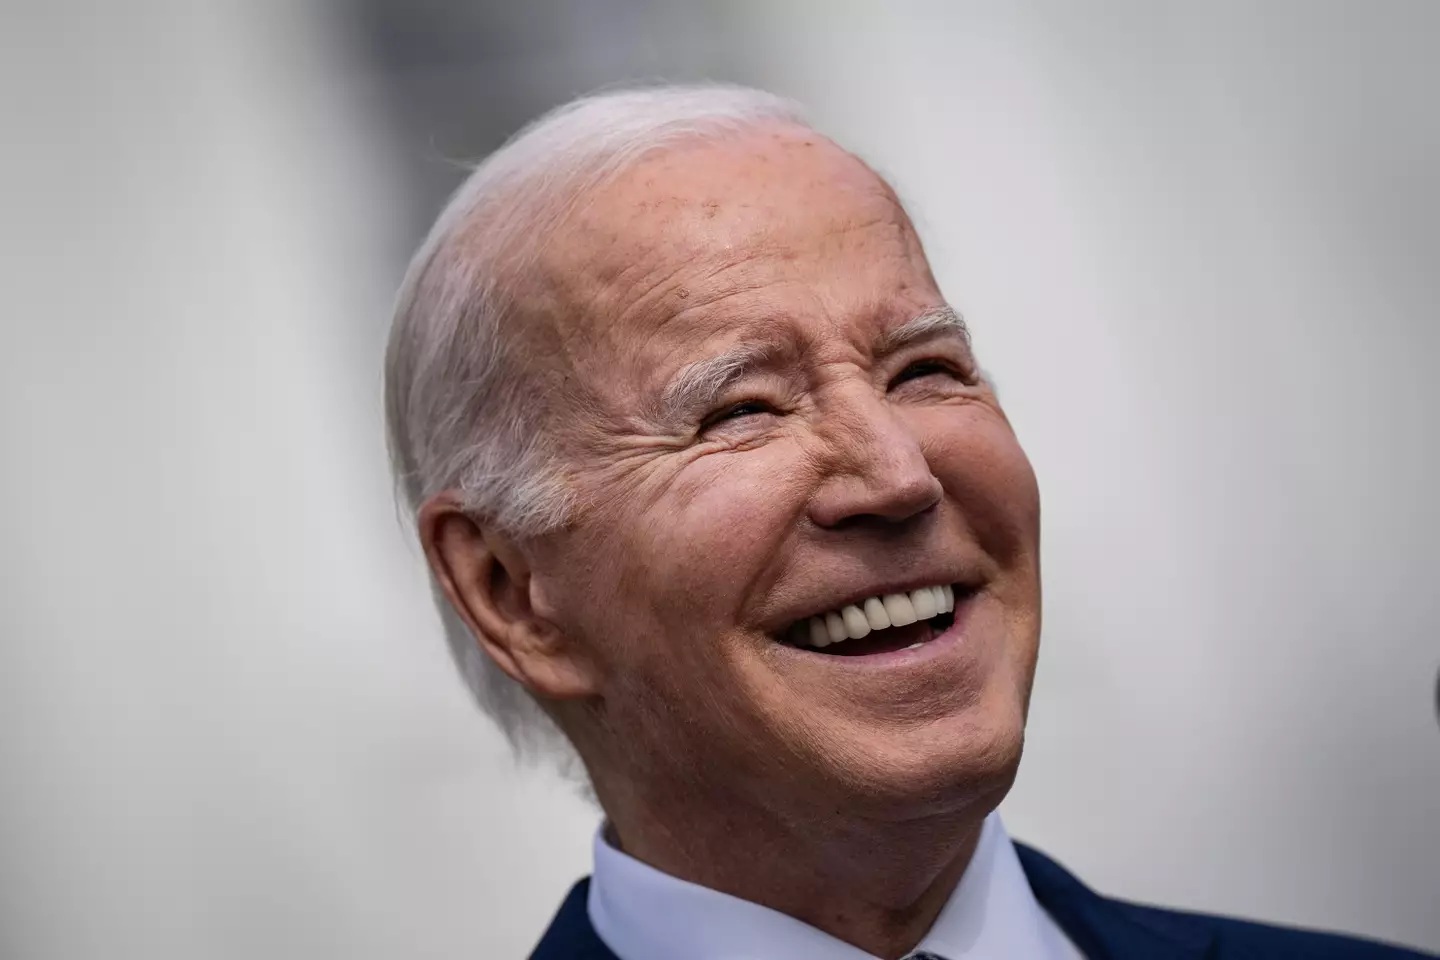 Biden has joked about his age.